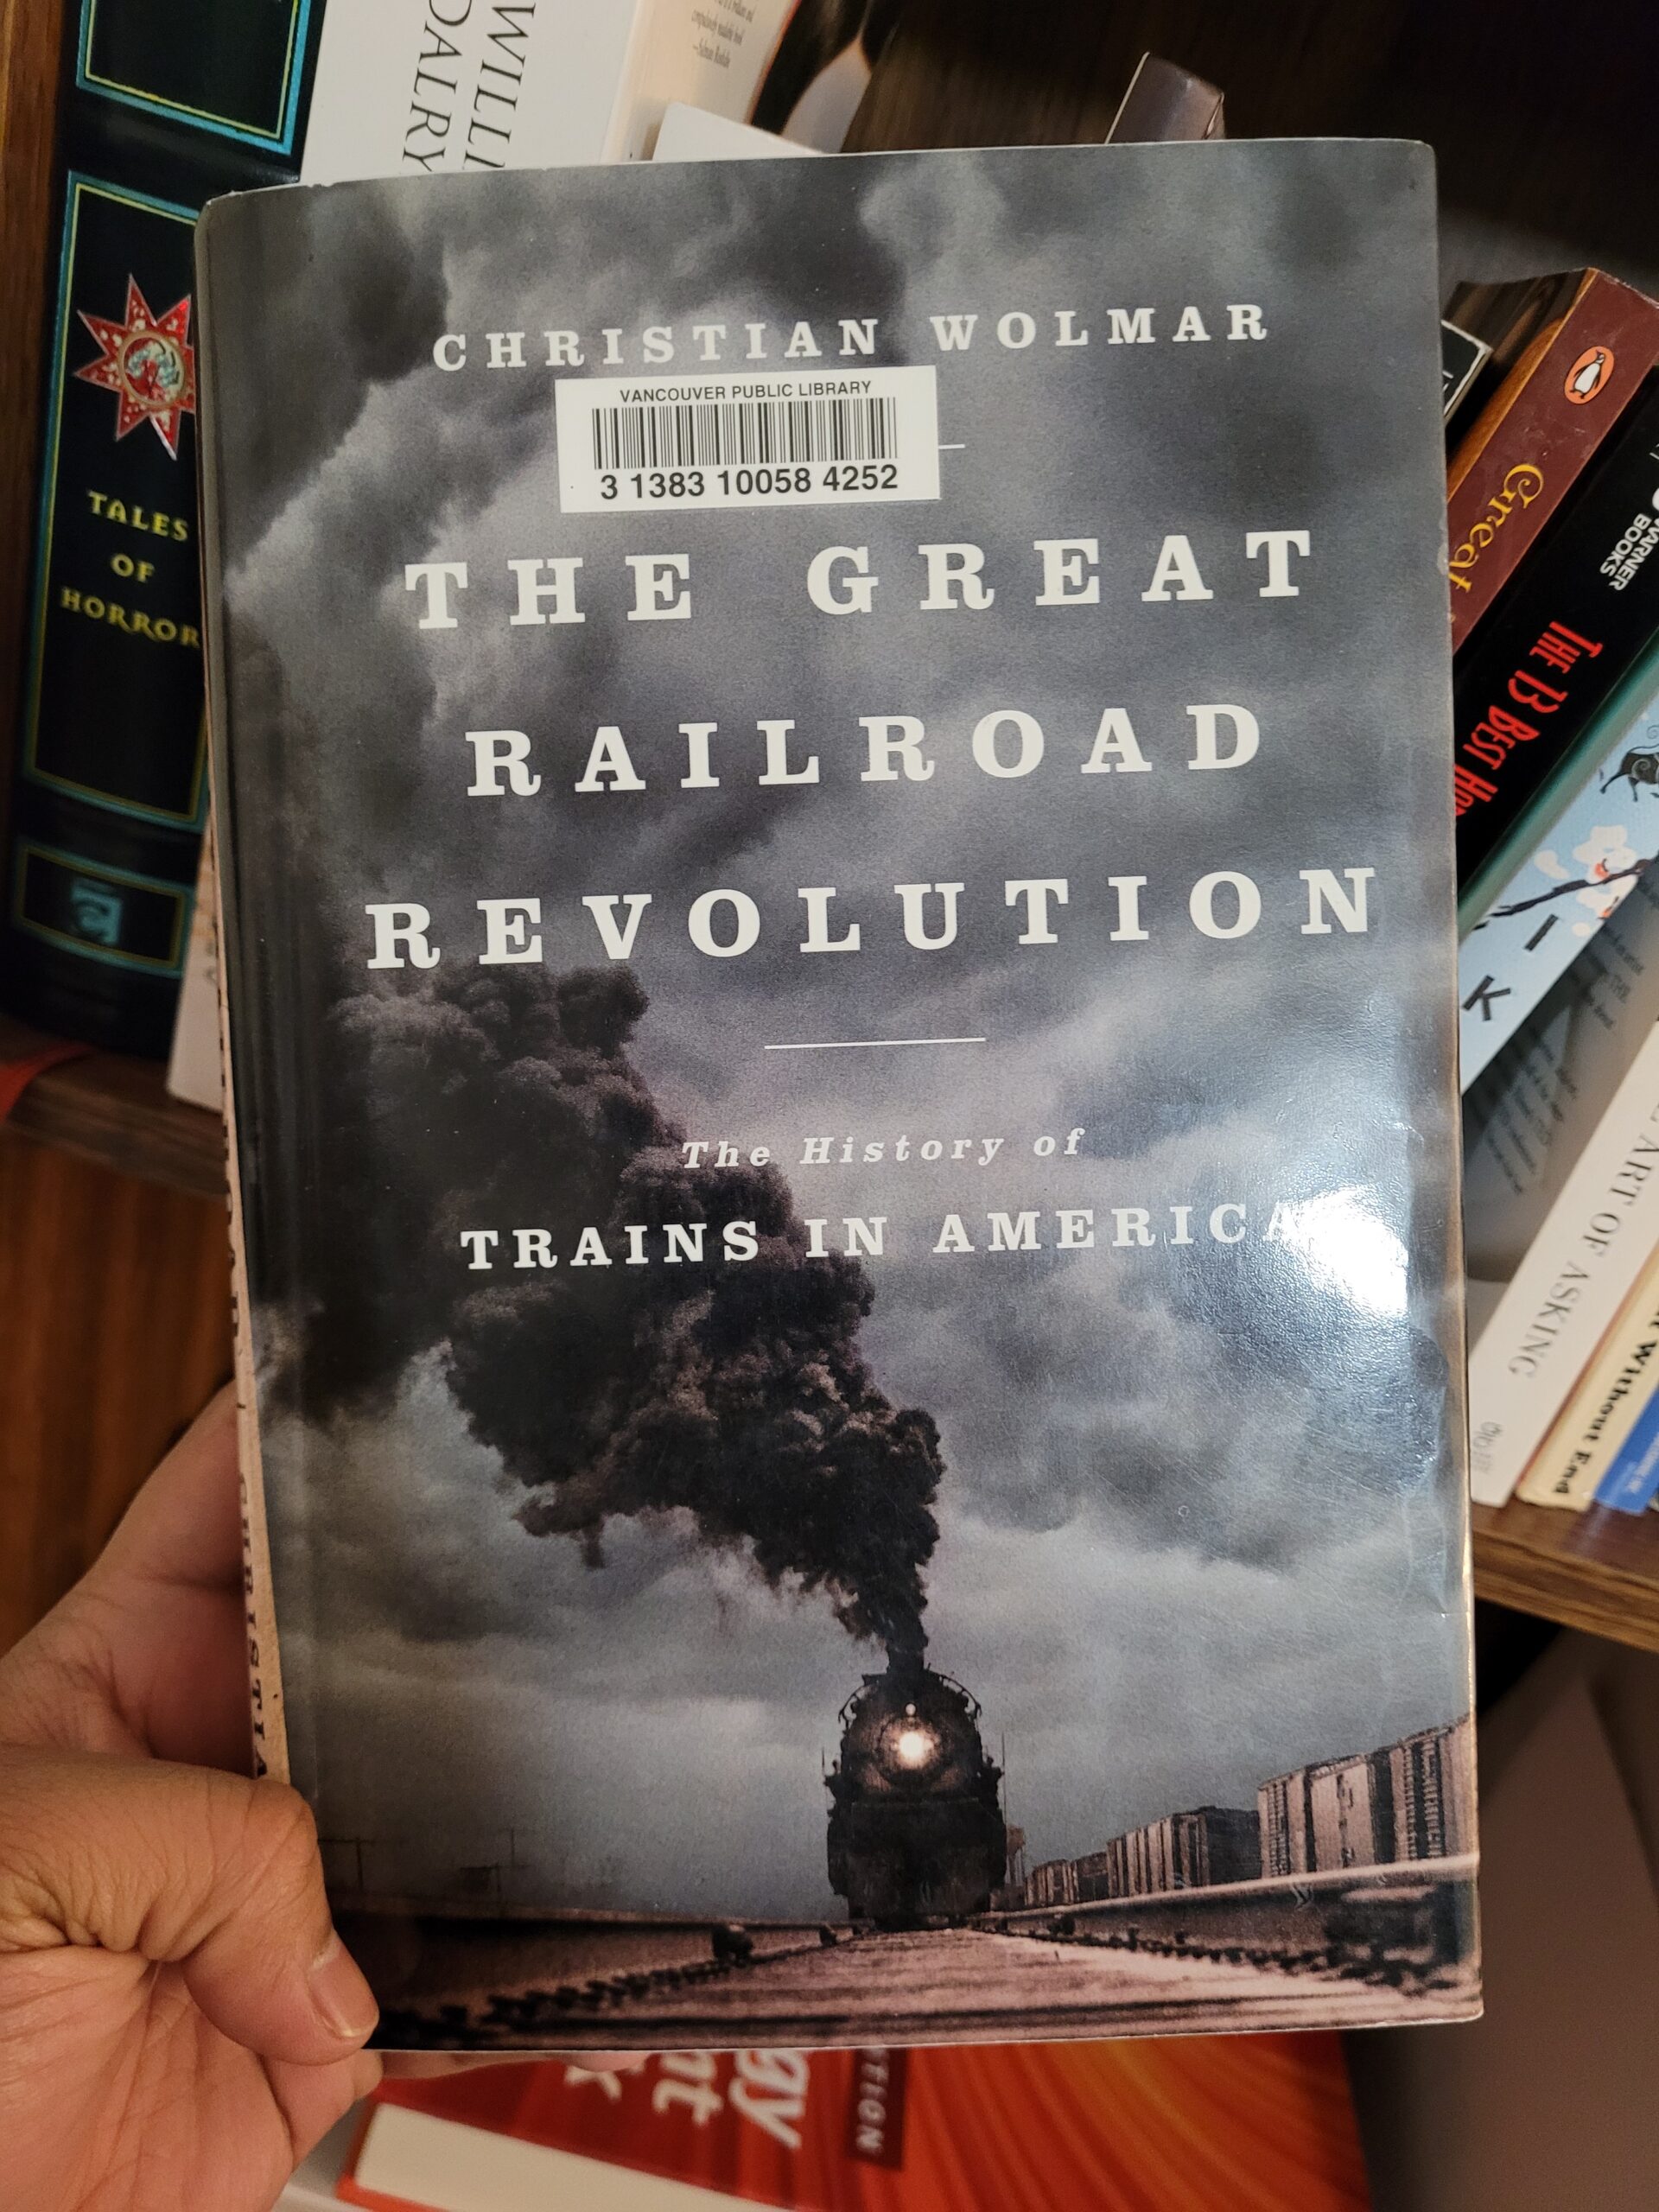 The Great Railroad Revolution || A 10 Point book review